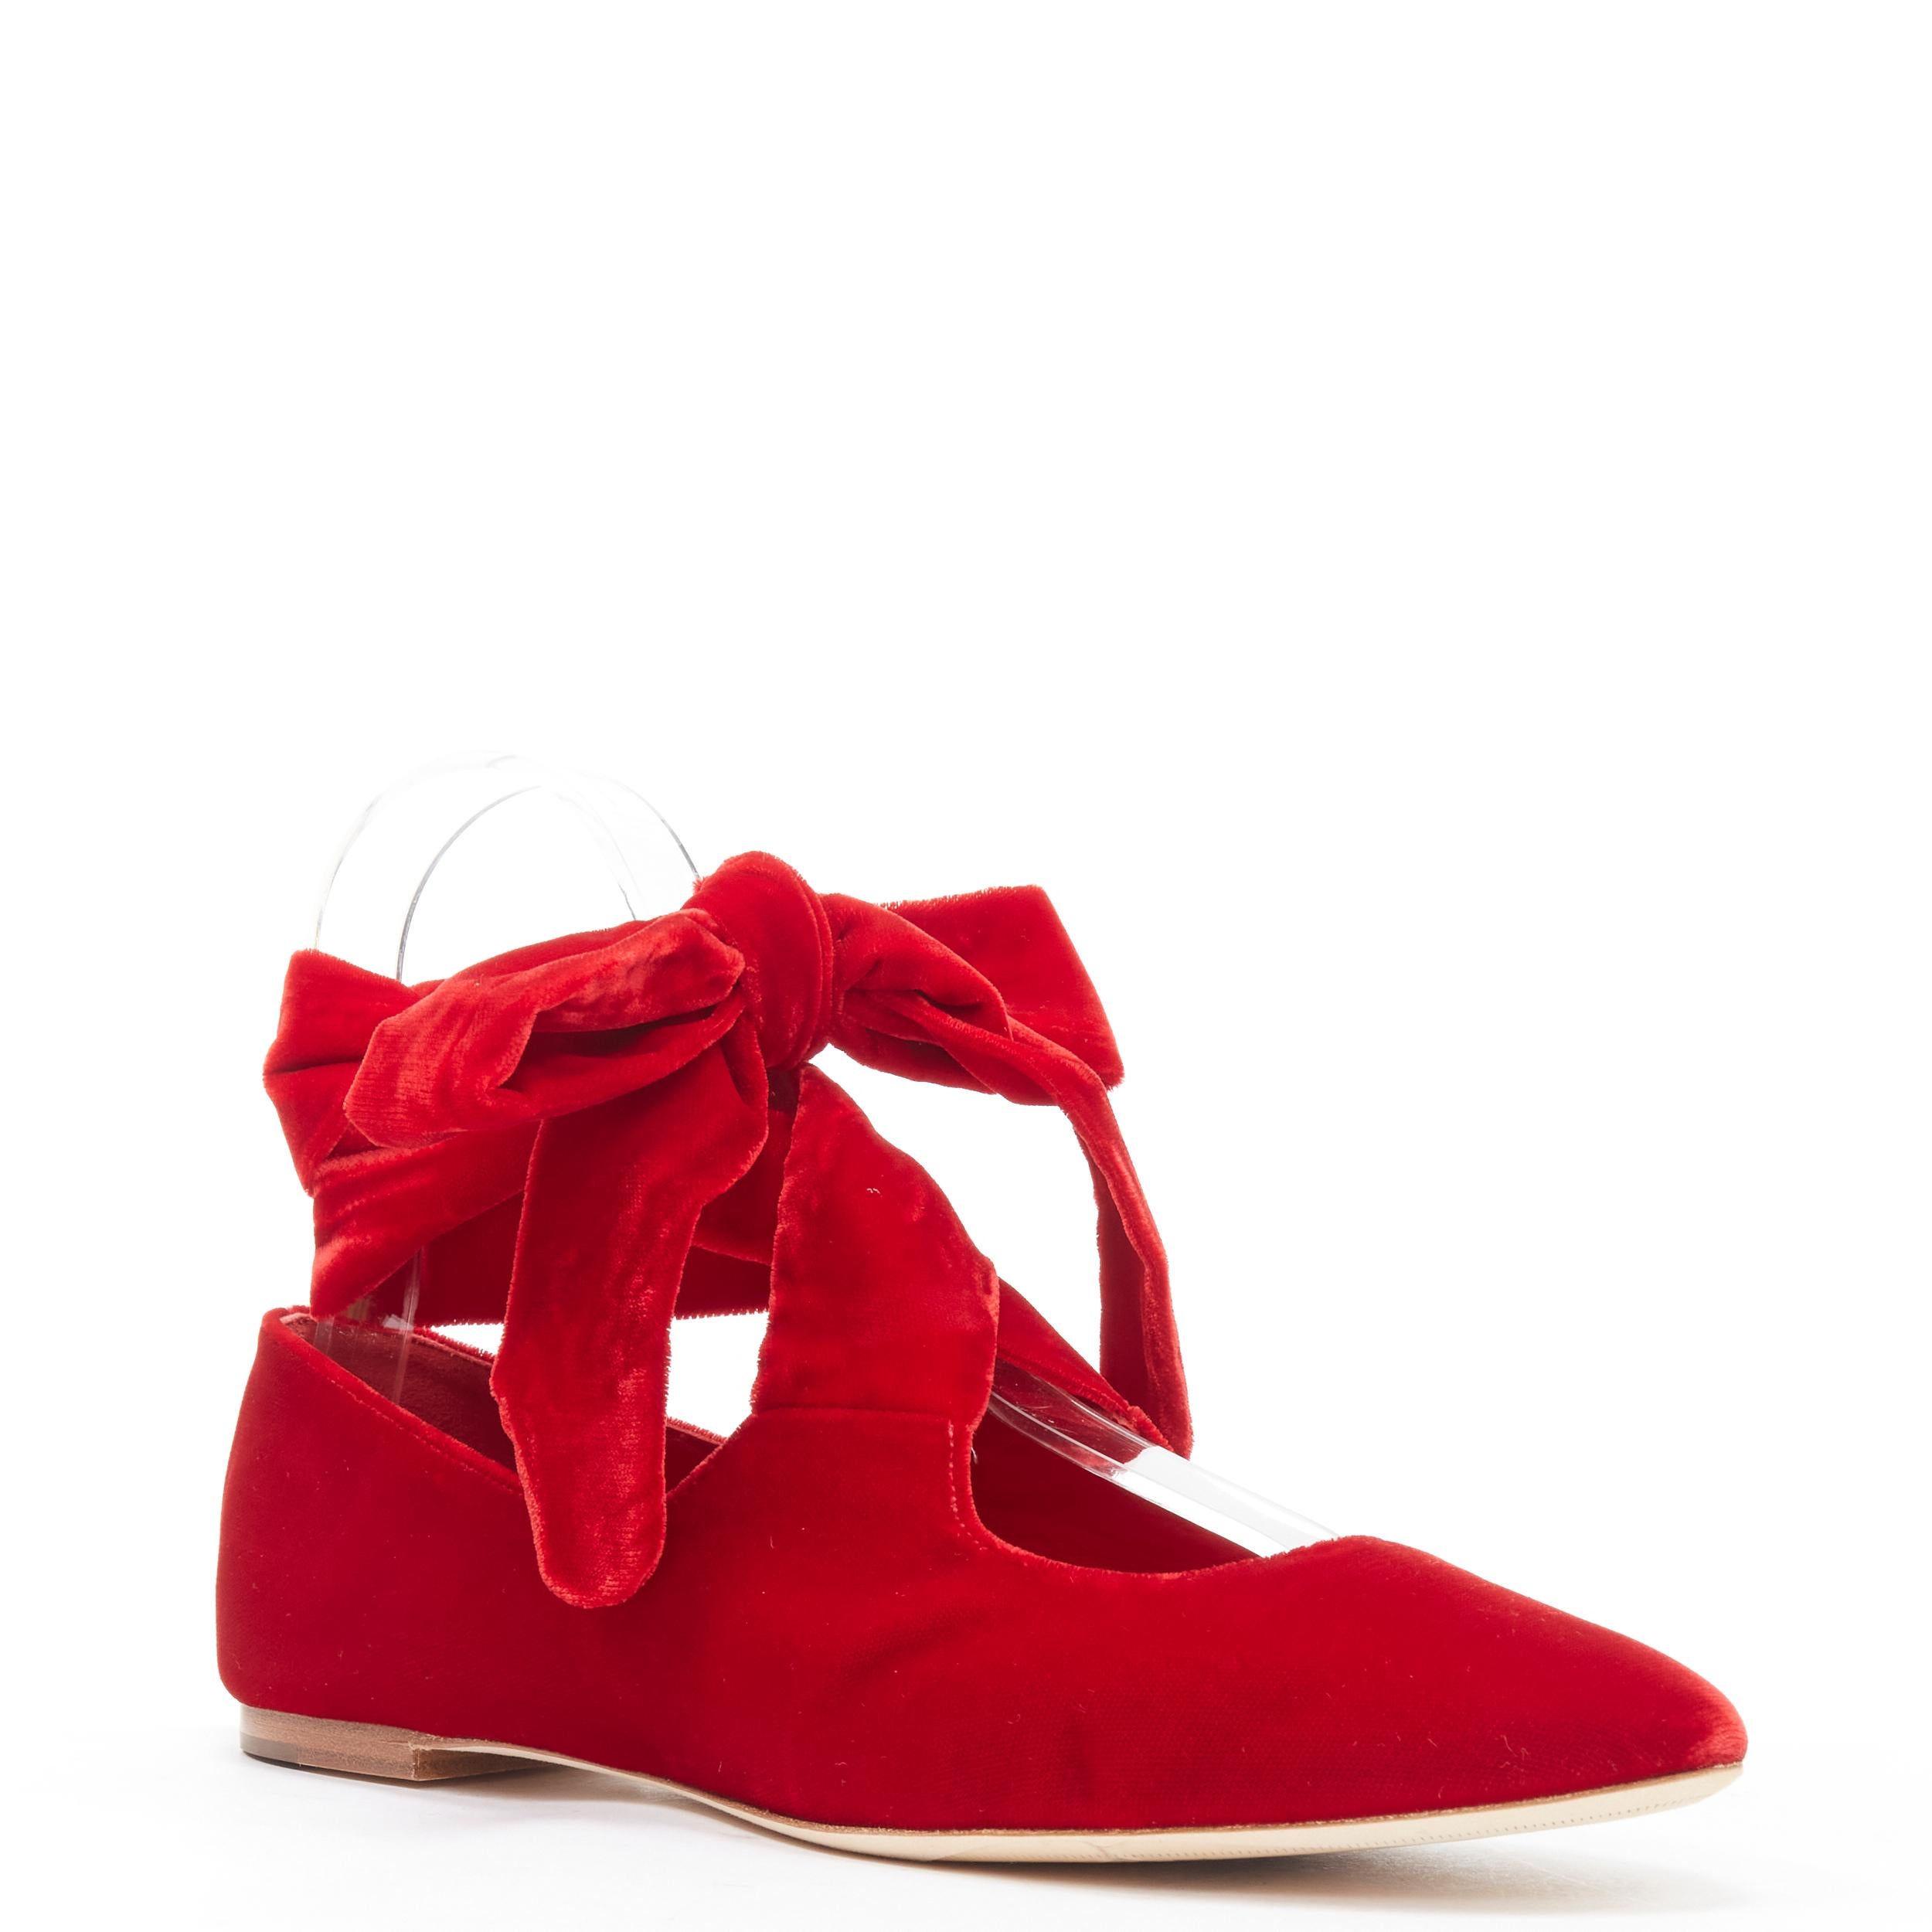 new THE ROW ELodie red velvet wrap bow tie almond toe flats EU38
Reference: MELK/A00219
Brand: The Row
Model: Elodie
Material: Velvet
Color: Red
Pattern: Solid
Made in: Italy

CONDITION:
Condition: New without tags. Minor press marks on velvet.